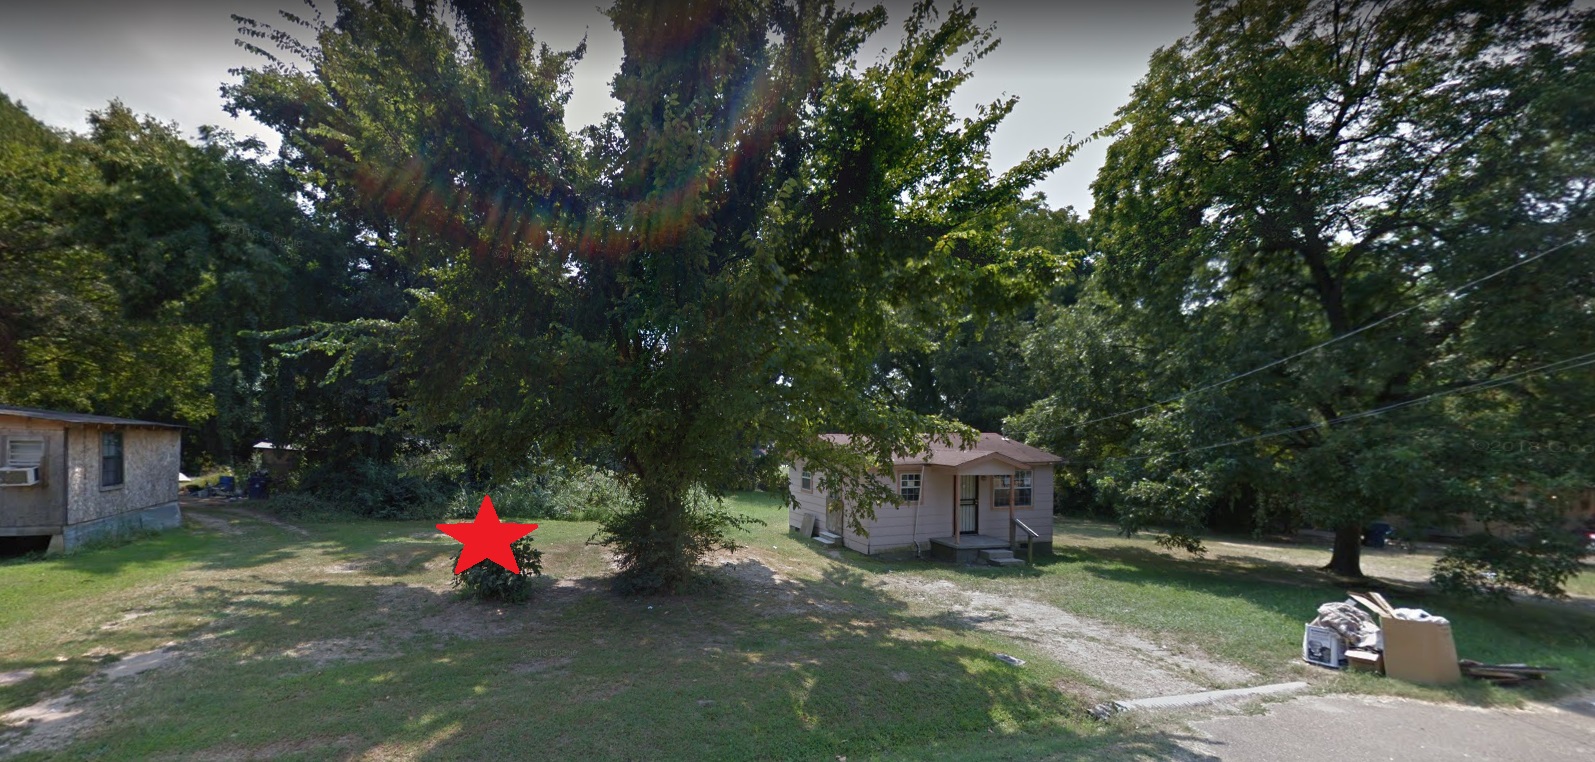 432 C Ave, Forrest City, AR 72335